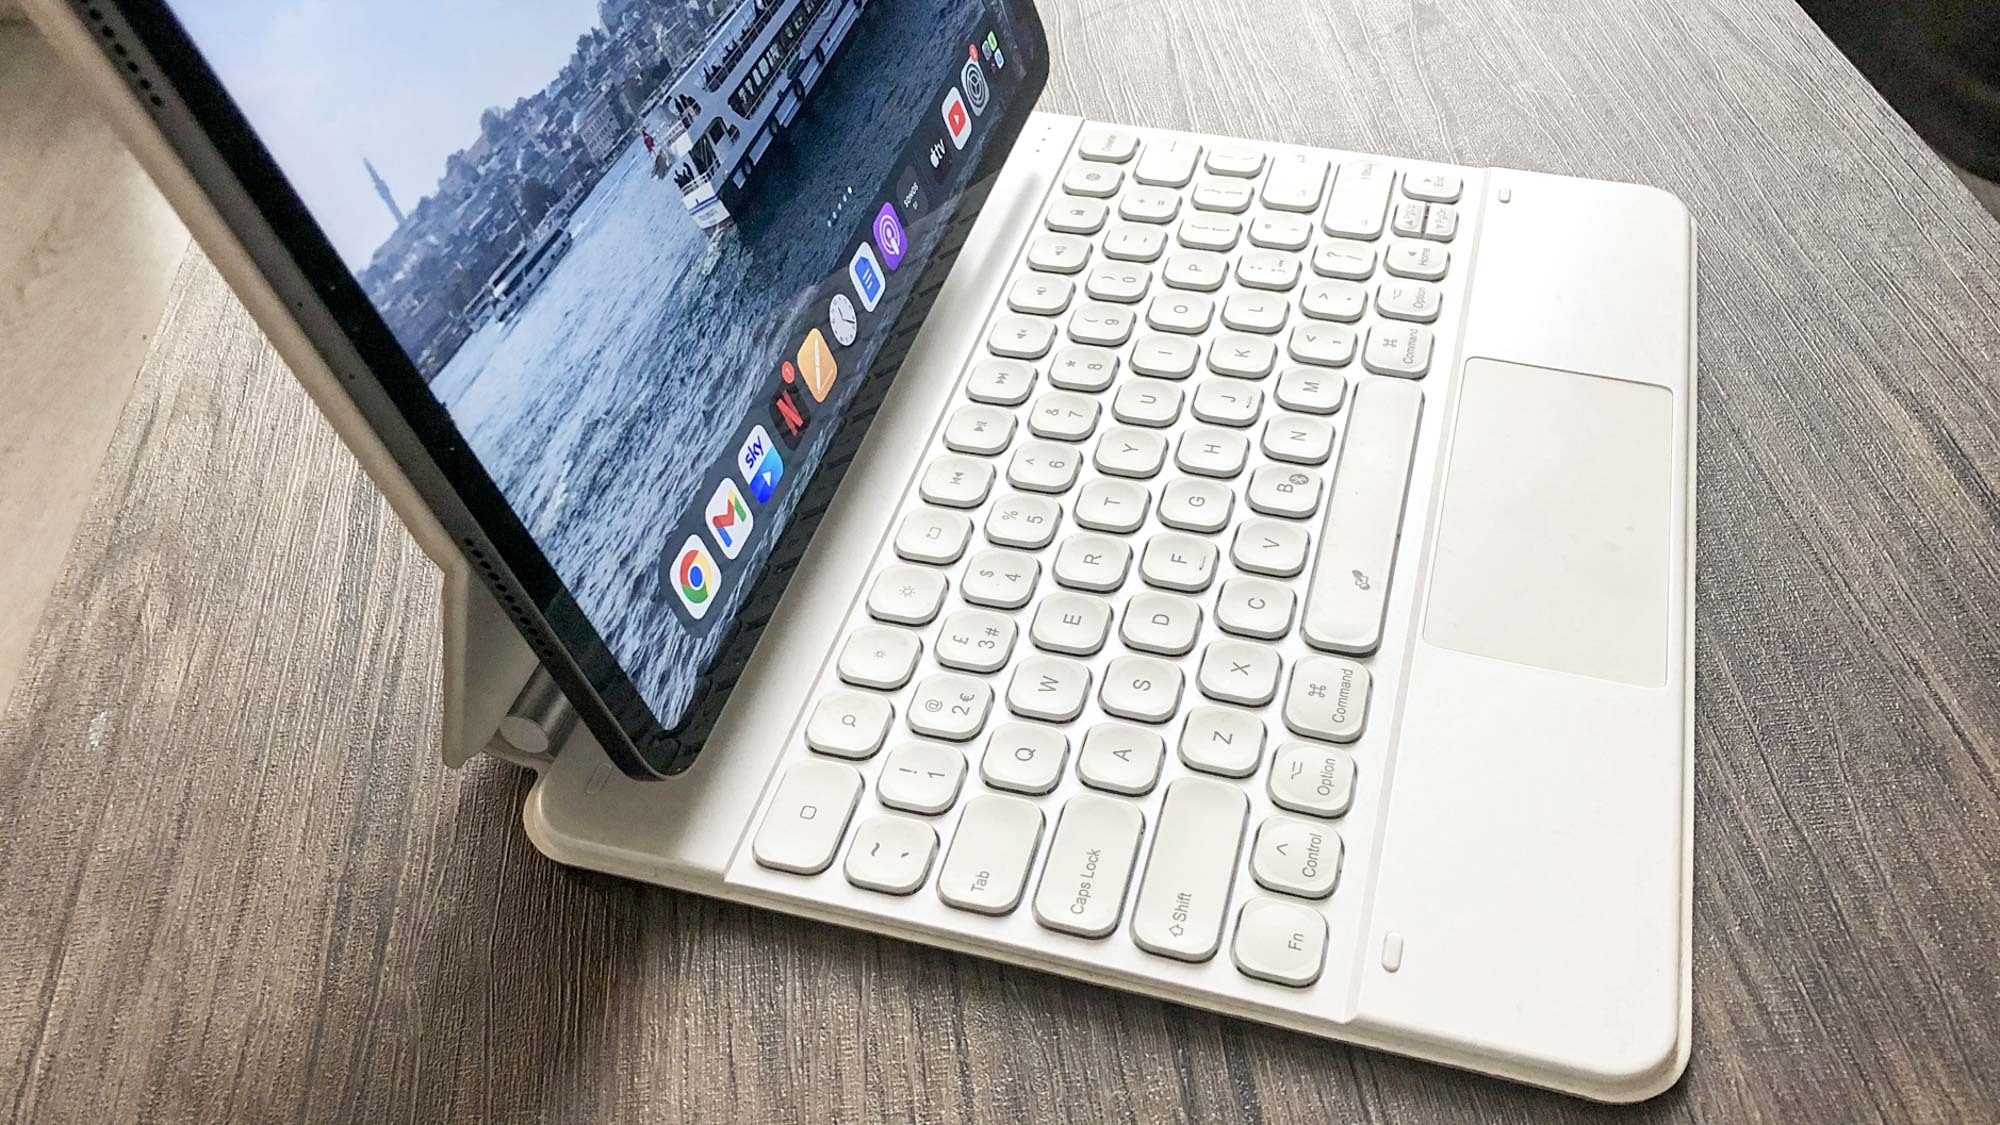 I replaced my iPad Pro's Magic Keyboard with a cheaper alternative